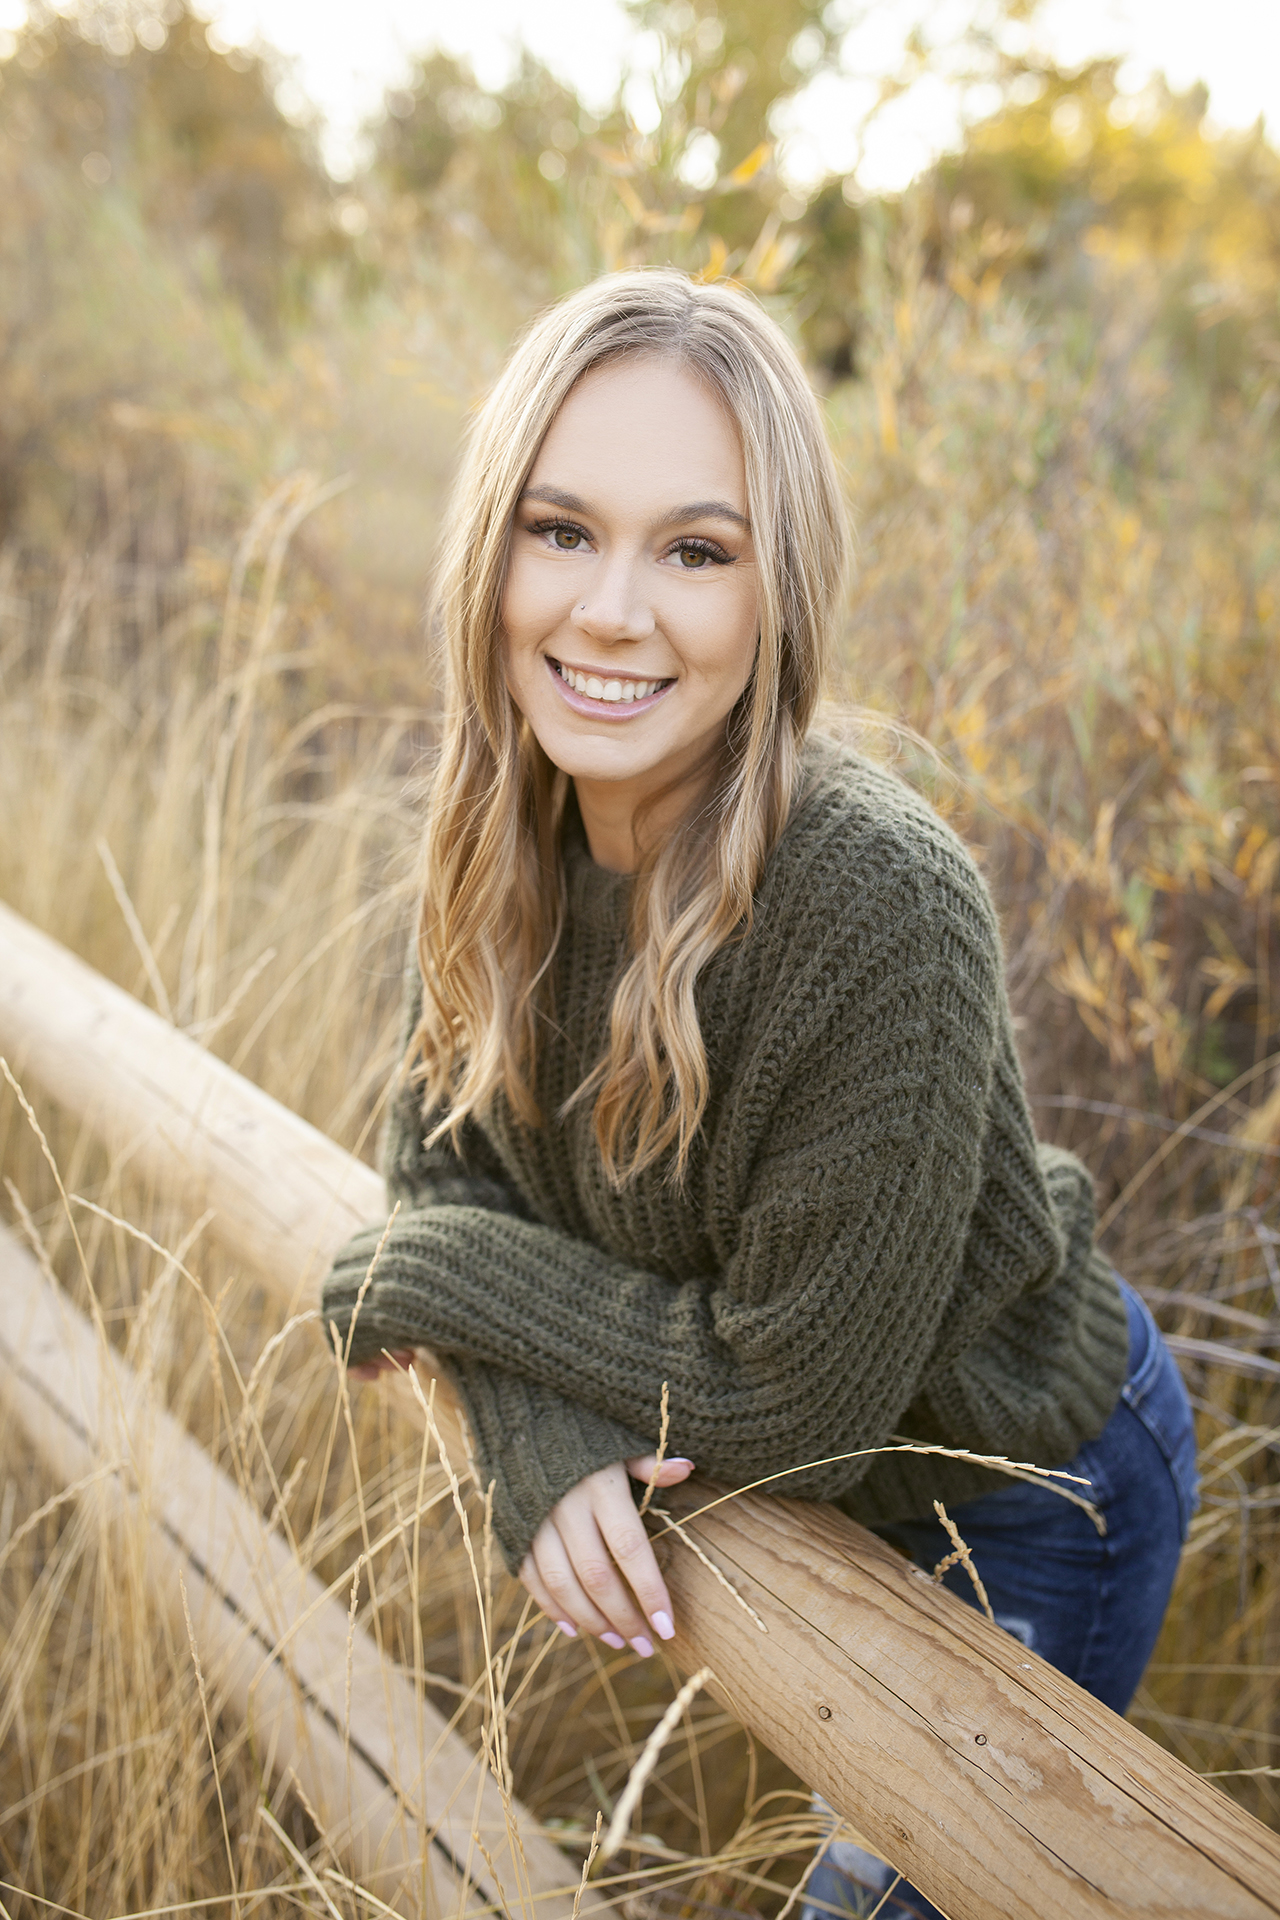 skyview high school senior pictures, outdoor fall country